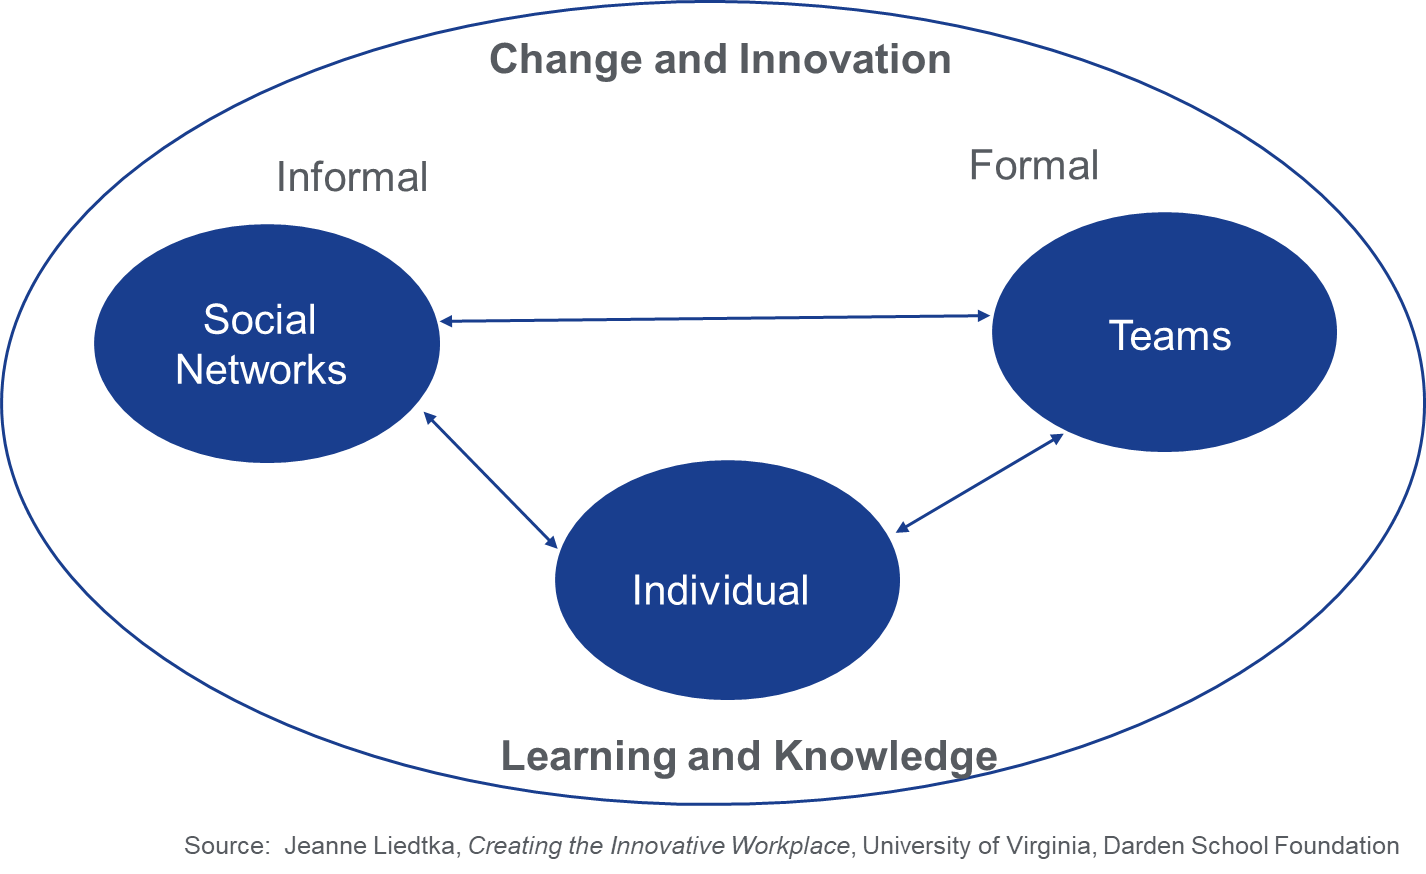 Networks and learning